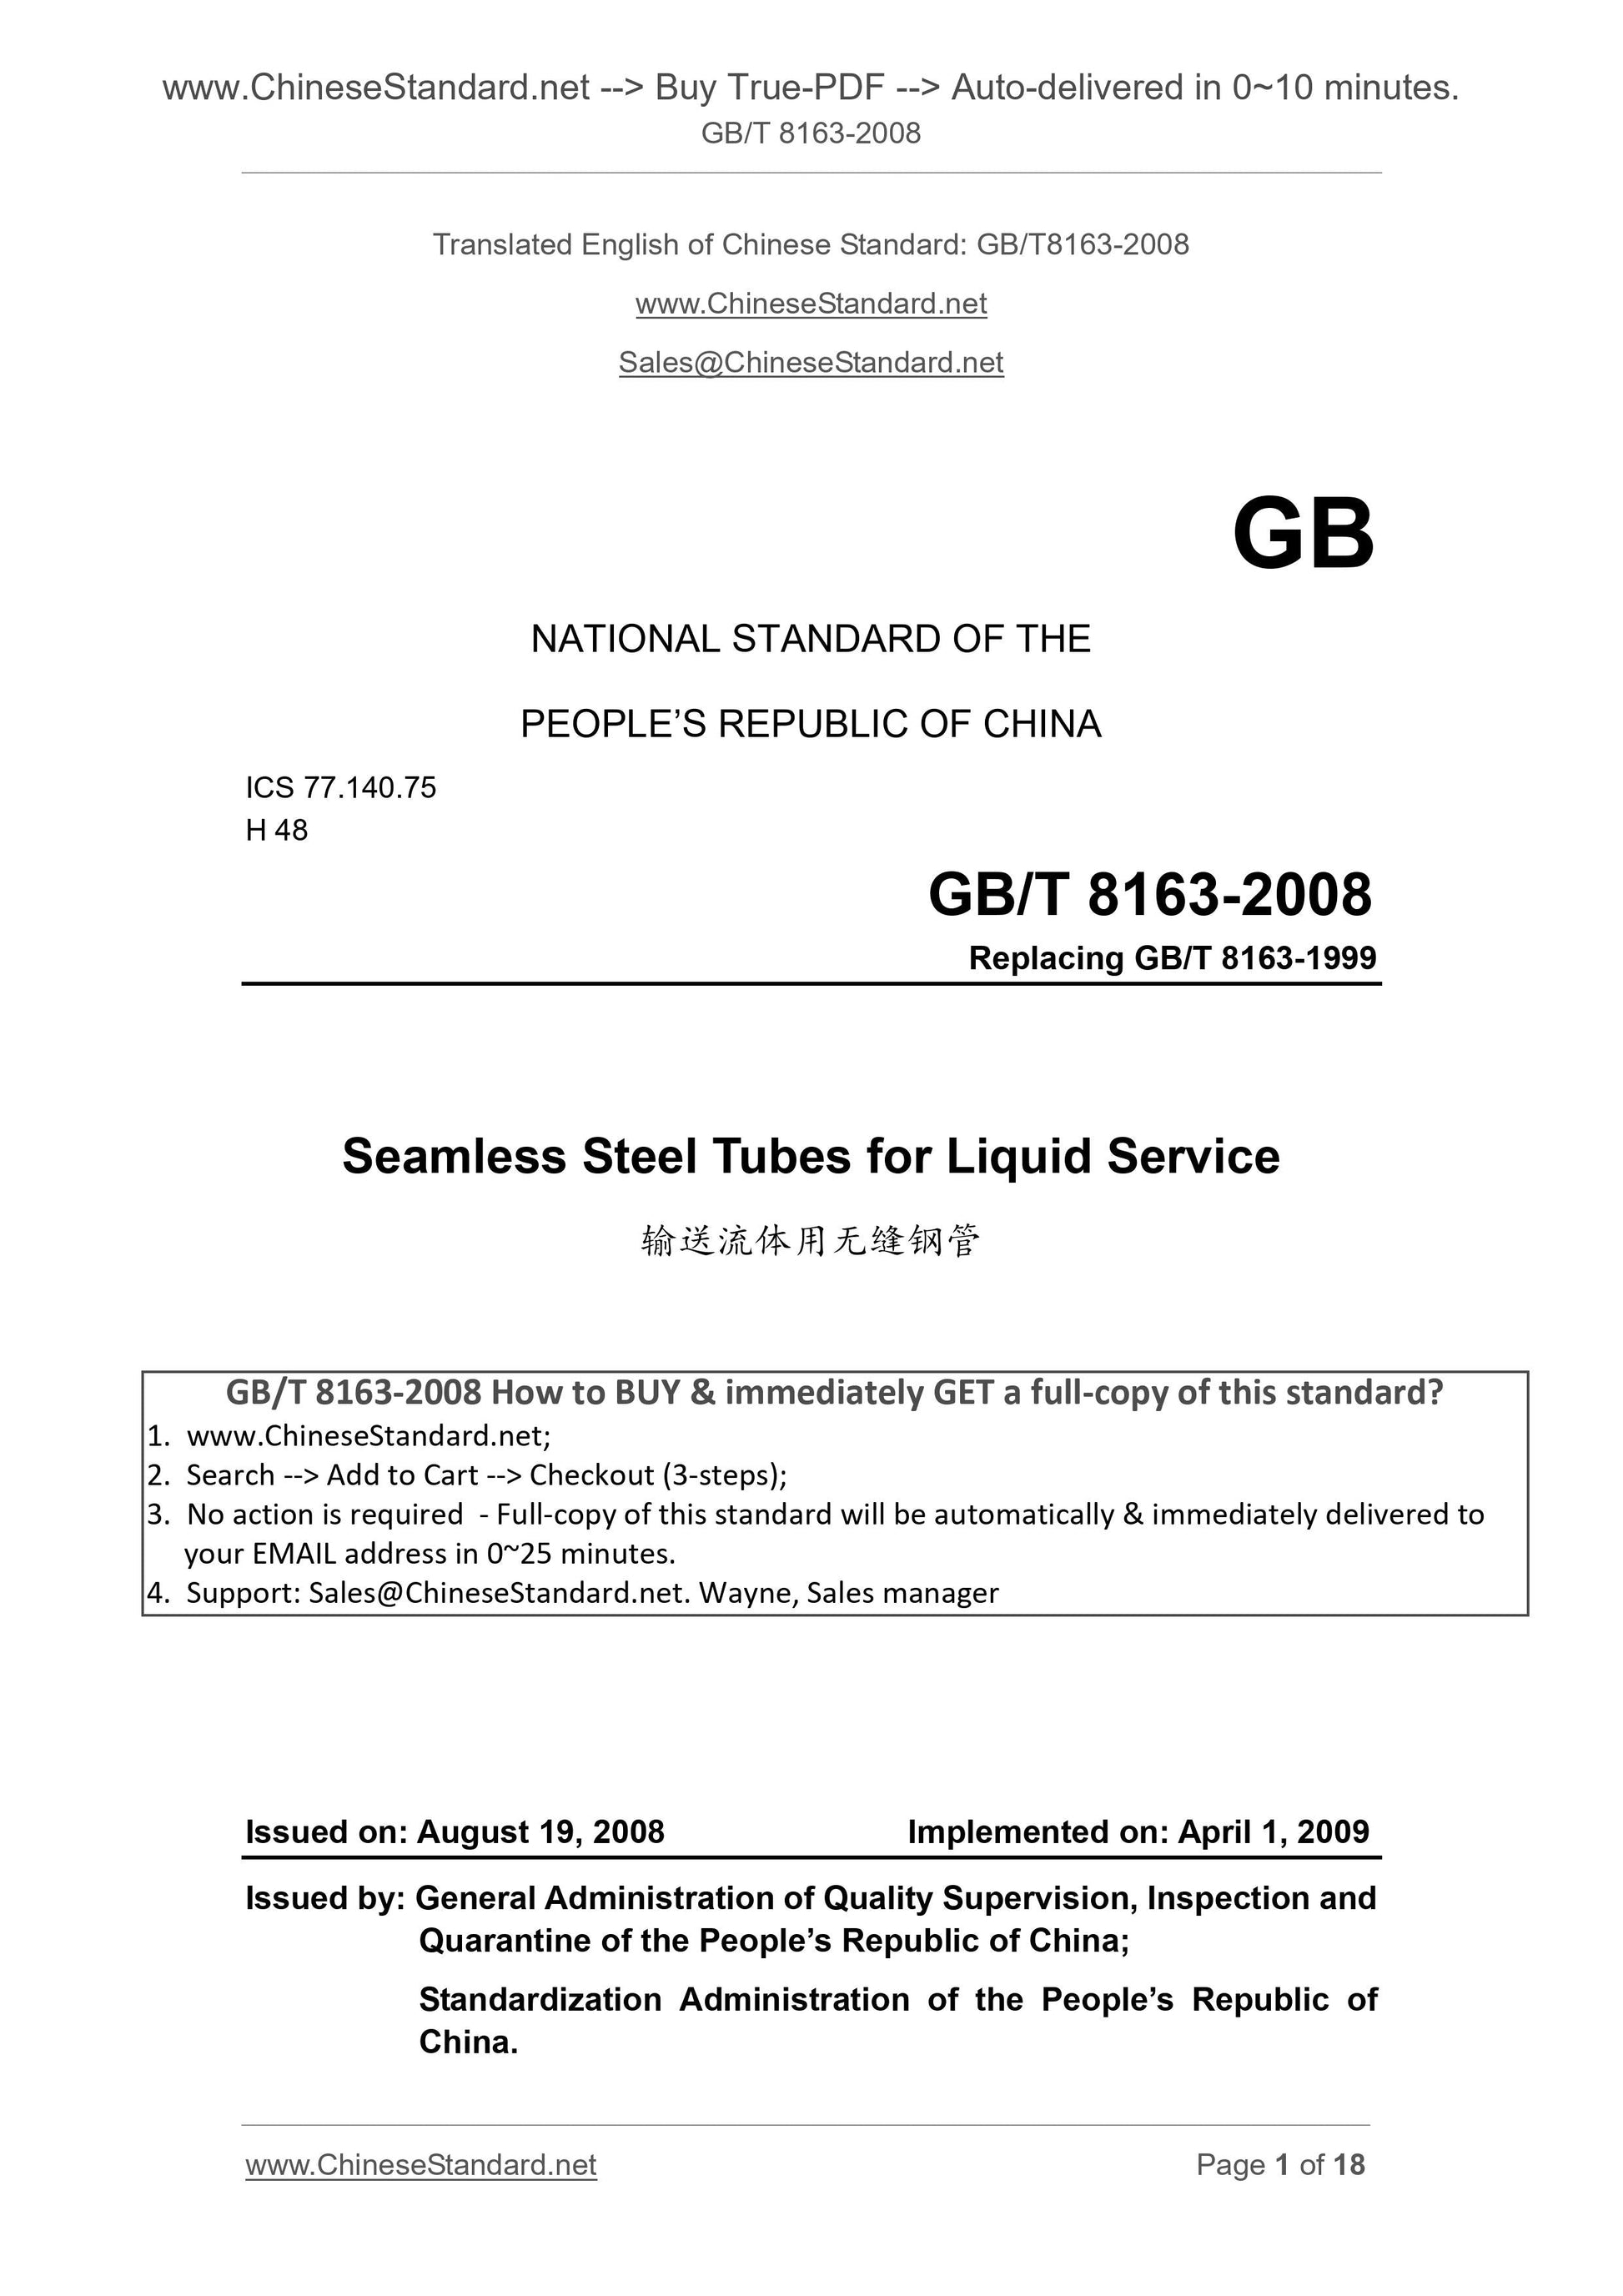 GB/T 8163-2008 Page 1